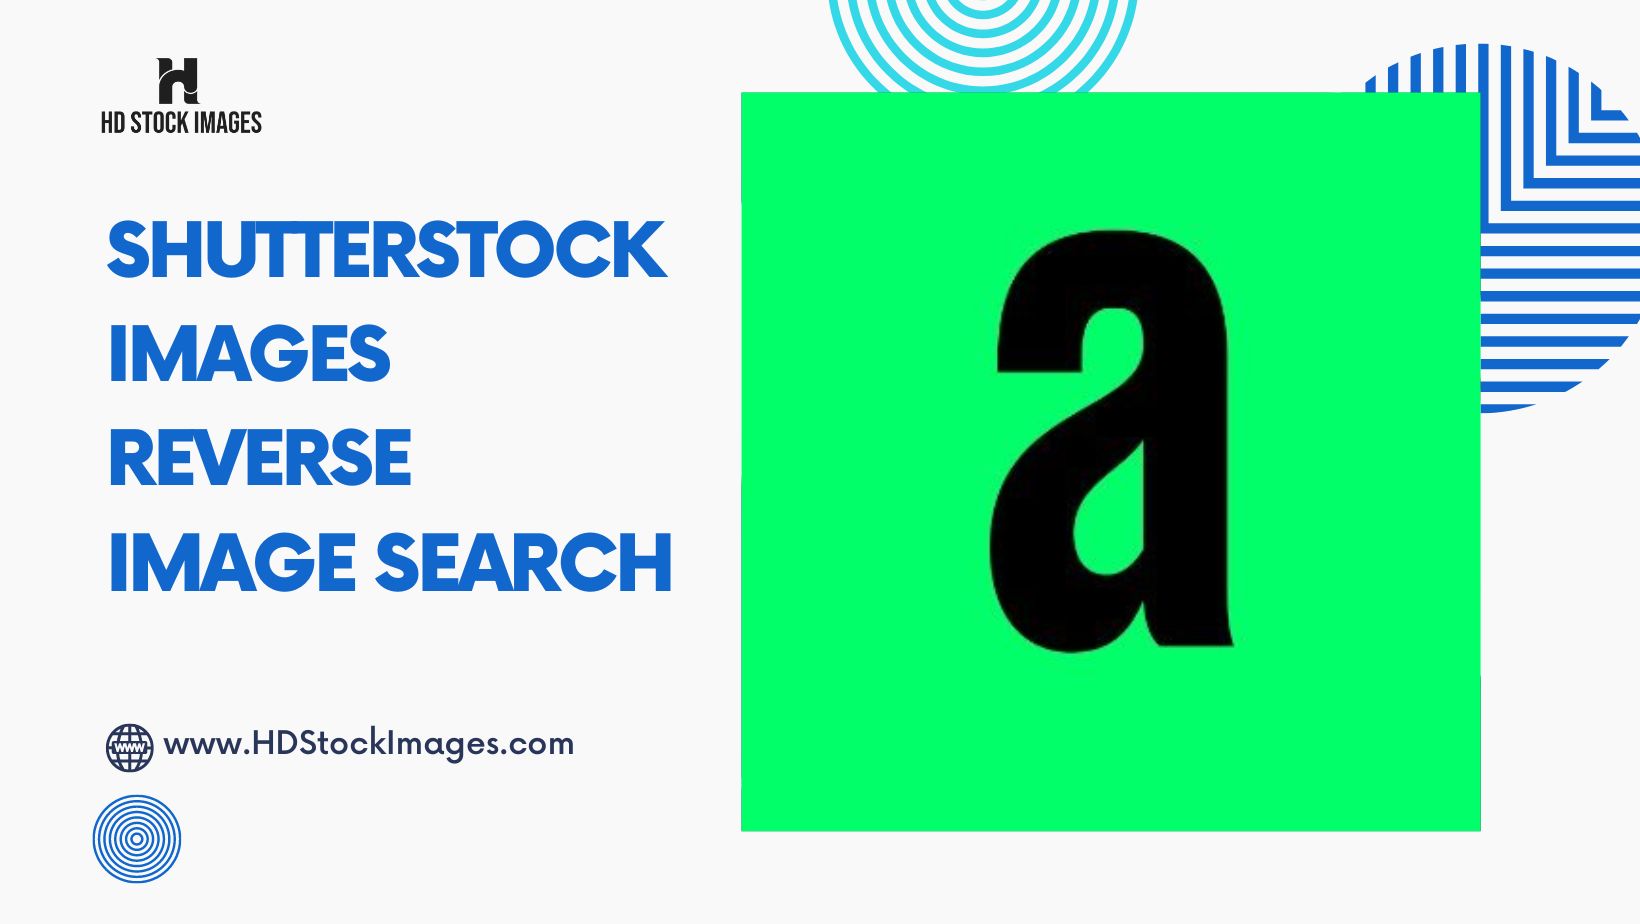 an image of Shutterstock Images Reverse Image Search: Discover Similar or Exact Images